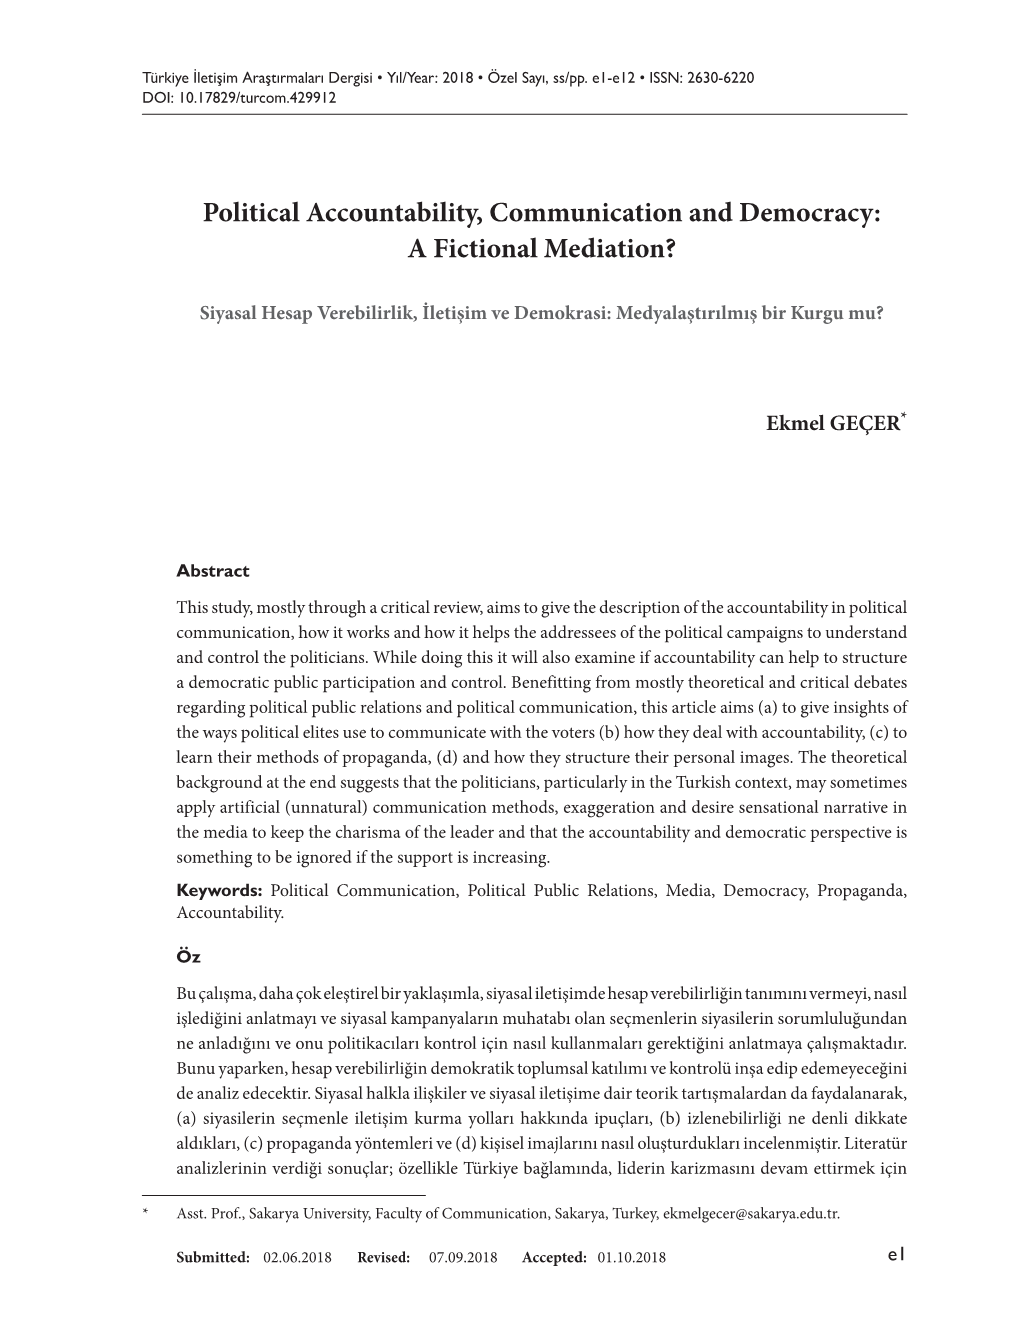 Political Accountability, Communication and Democracy: a Fictional Mediation?